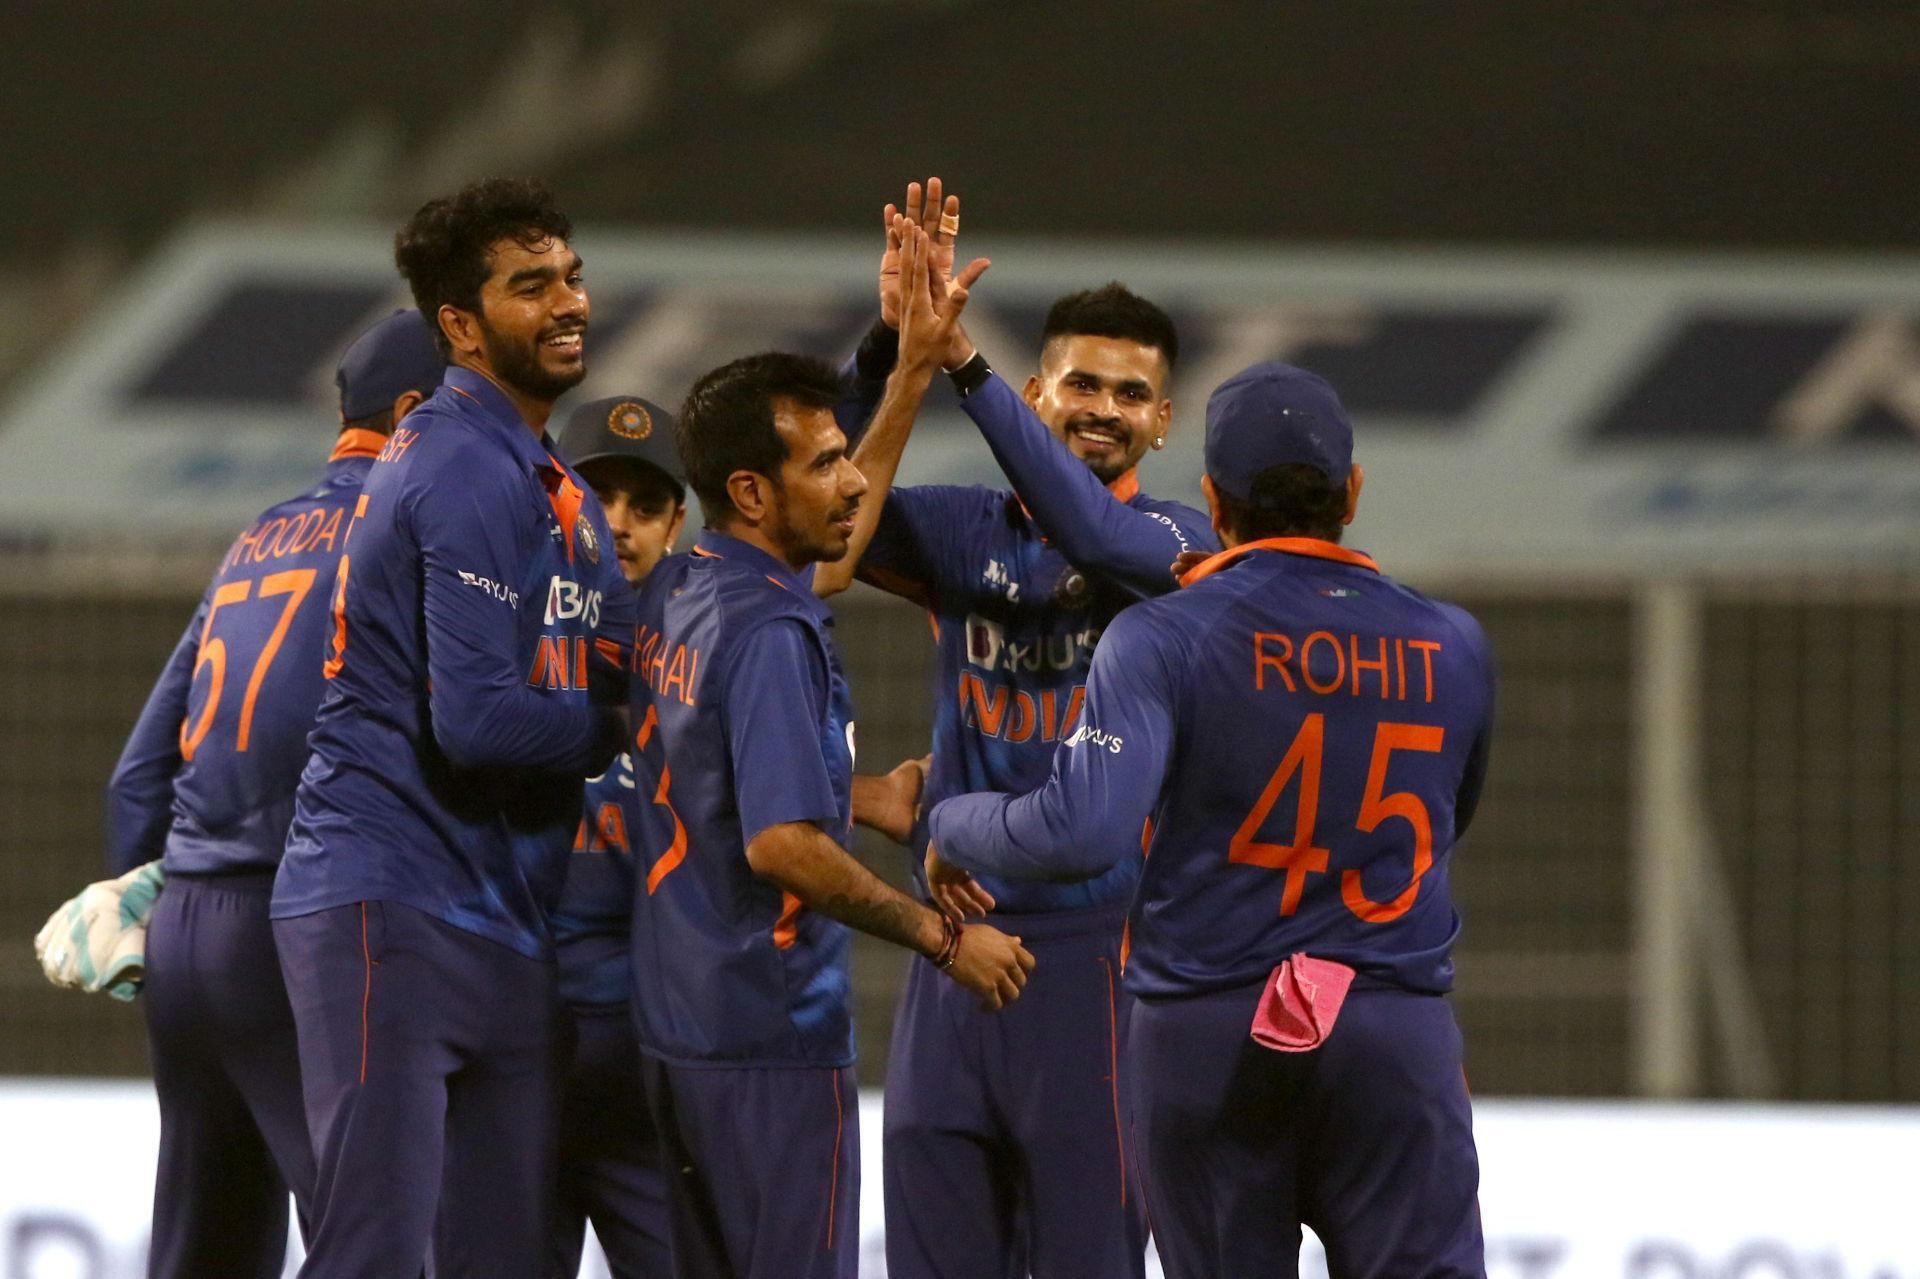 India start as favourites in the T20I series against Sri Lanka